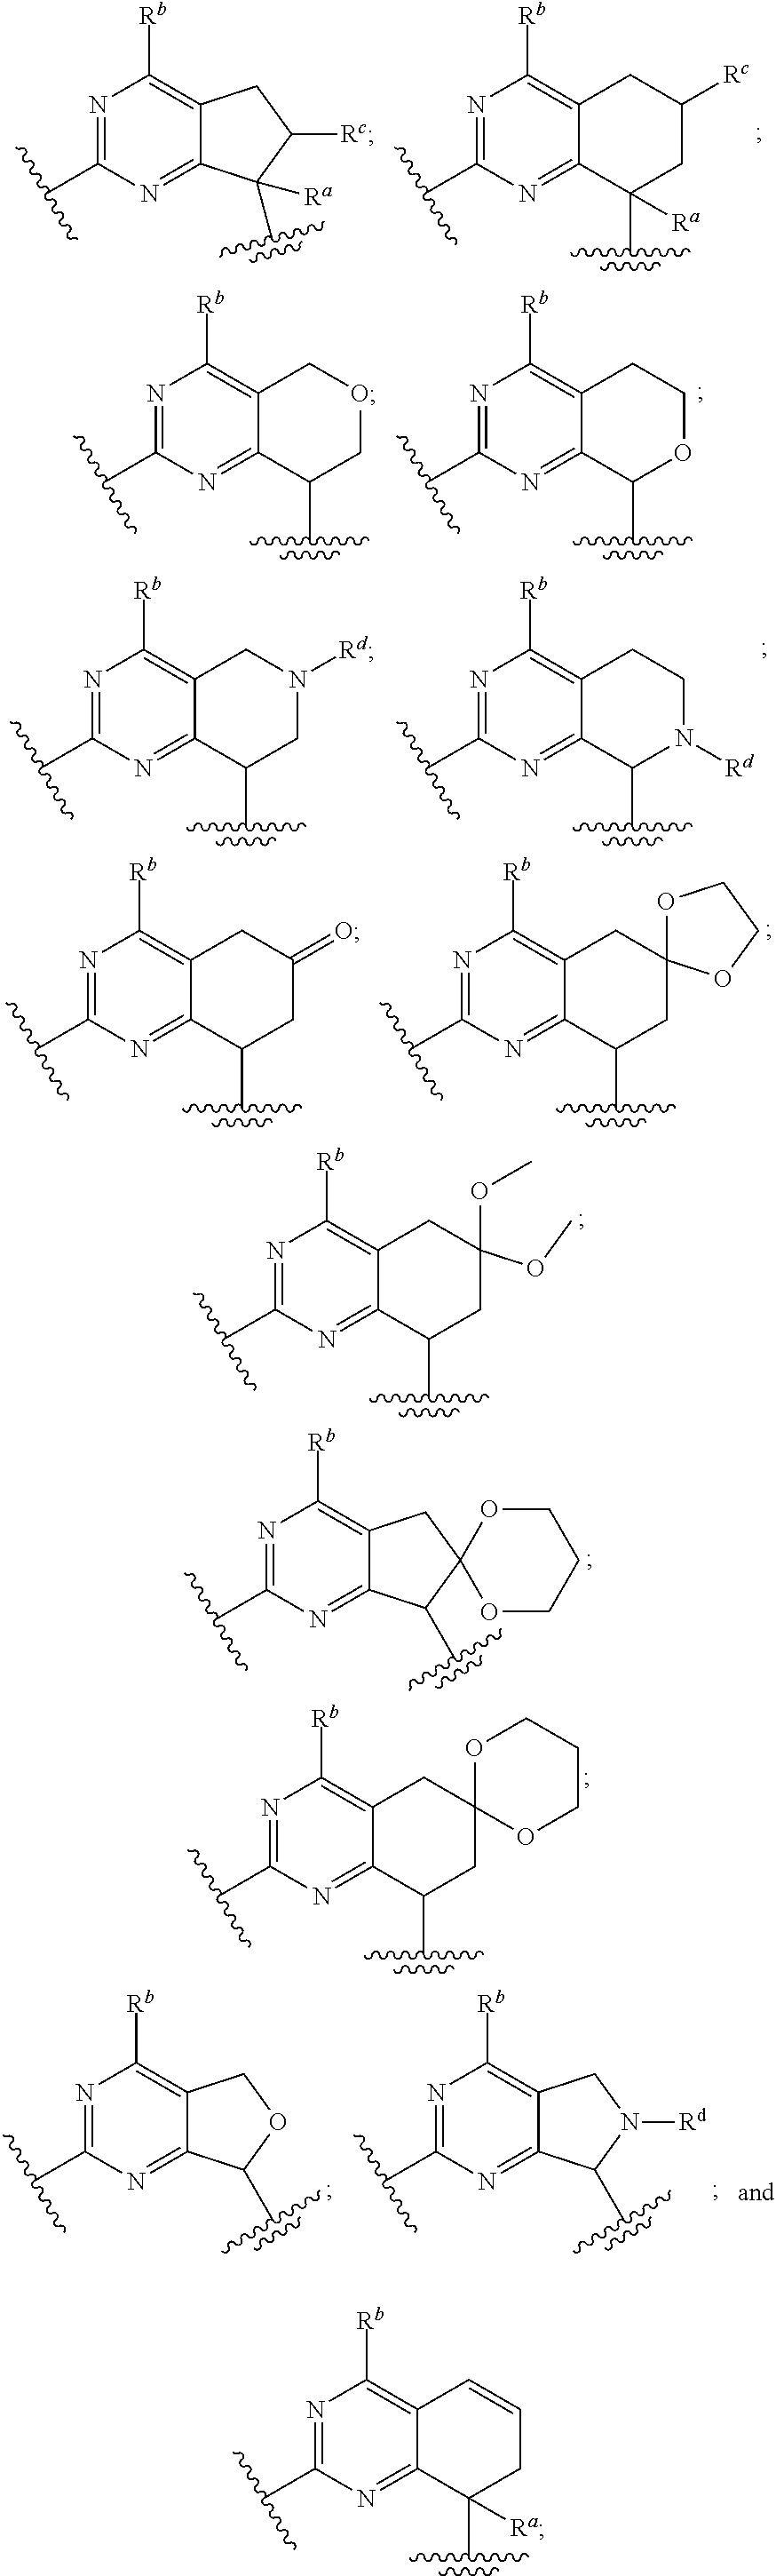 Compounds for the reduction of beta-amyloid production